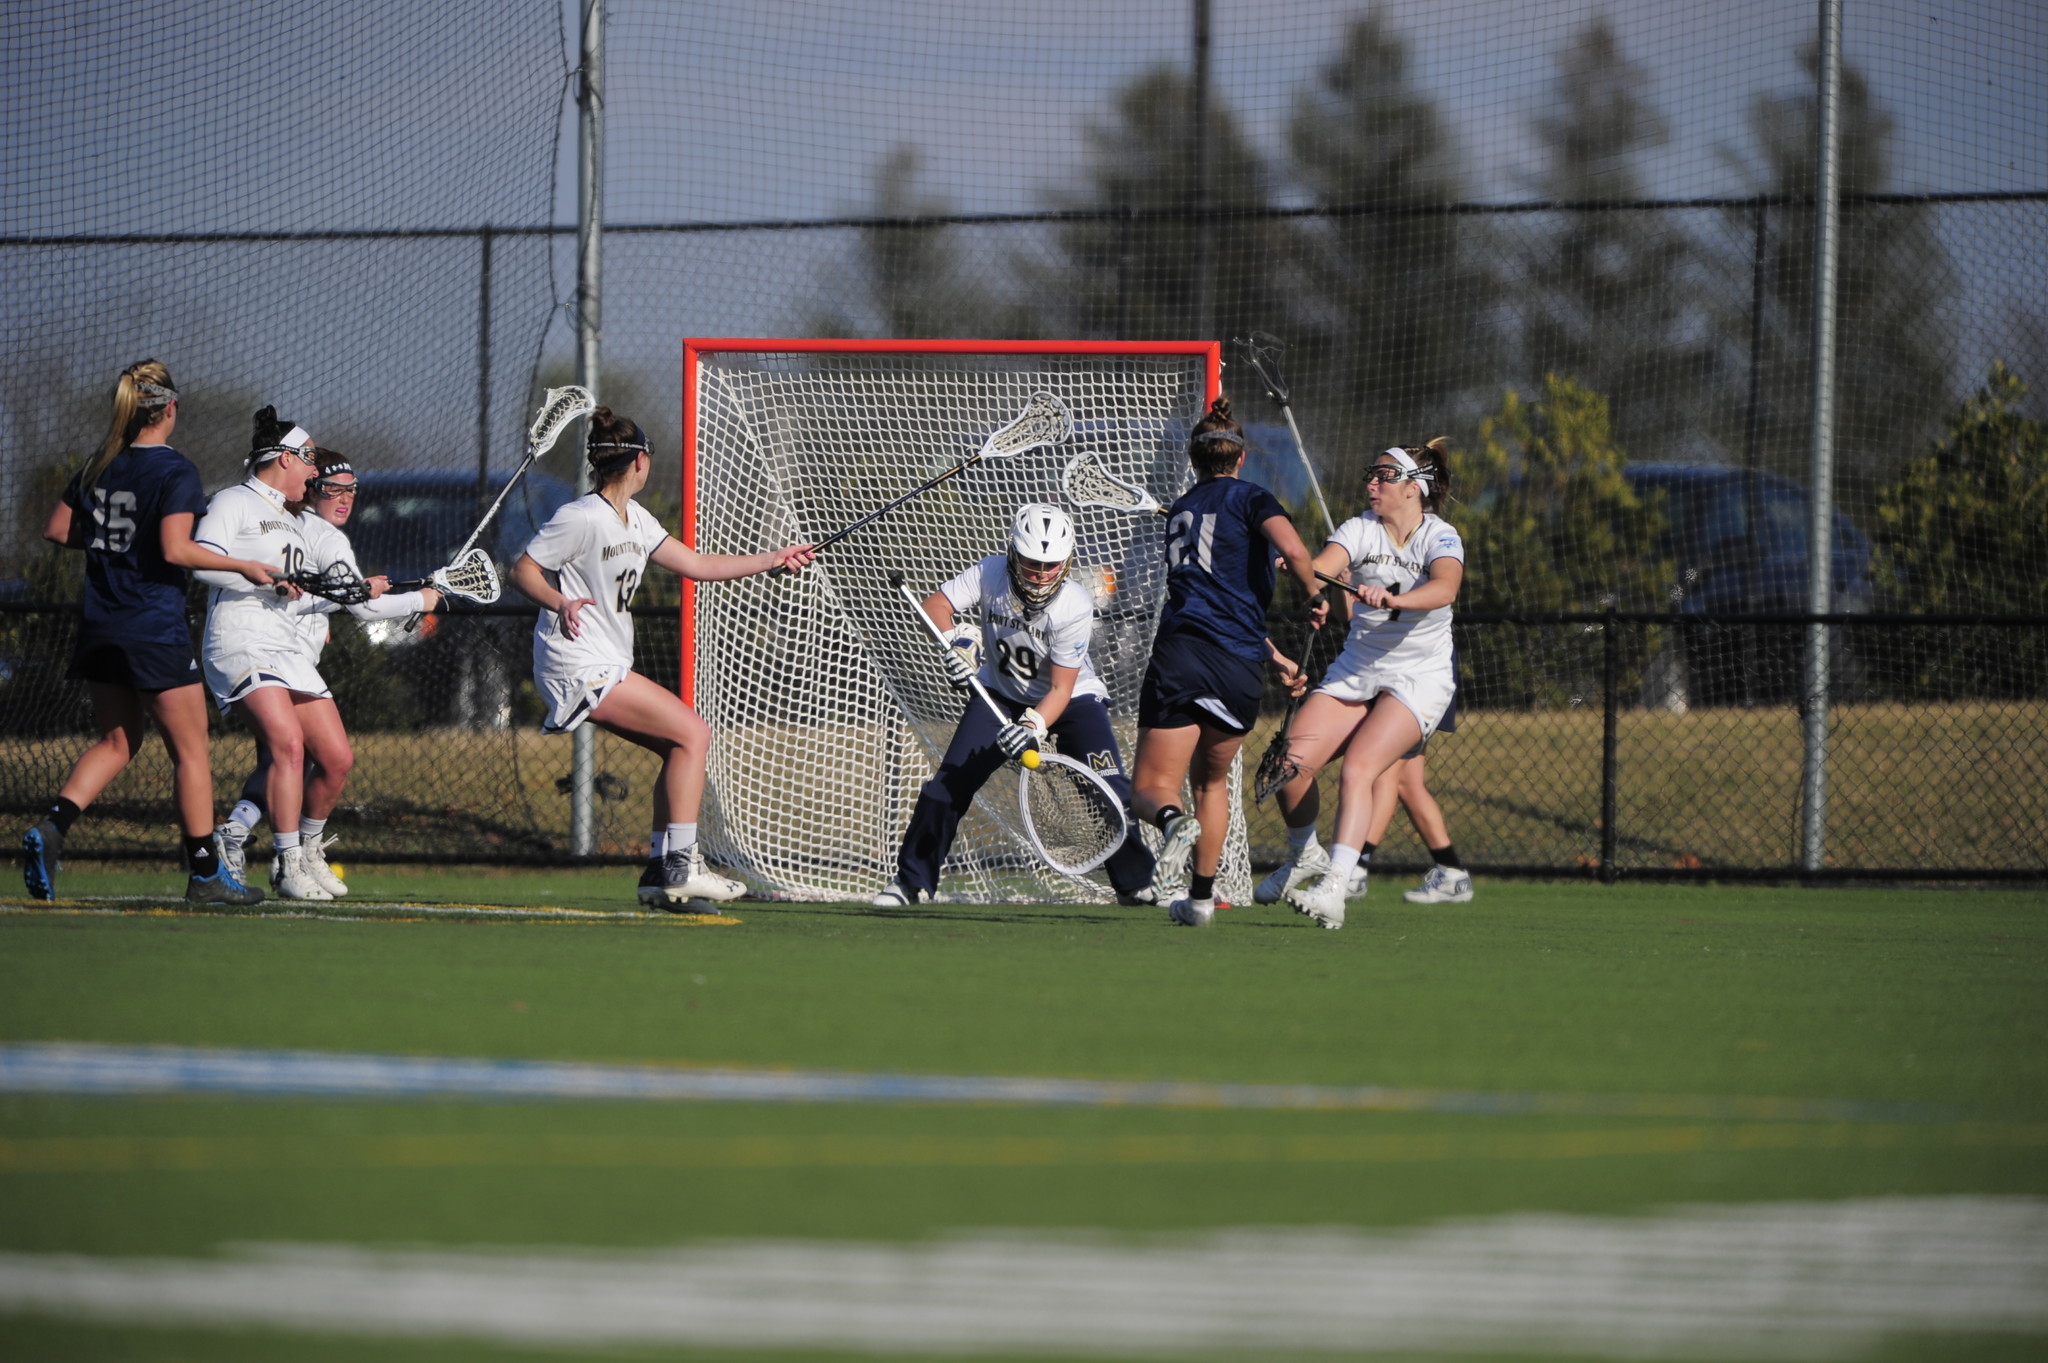 Women's lacrosse notebook: Mount St. Mary's going for tourney berth - Baltimore Sun